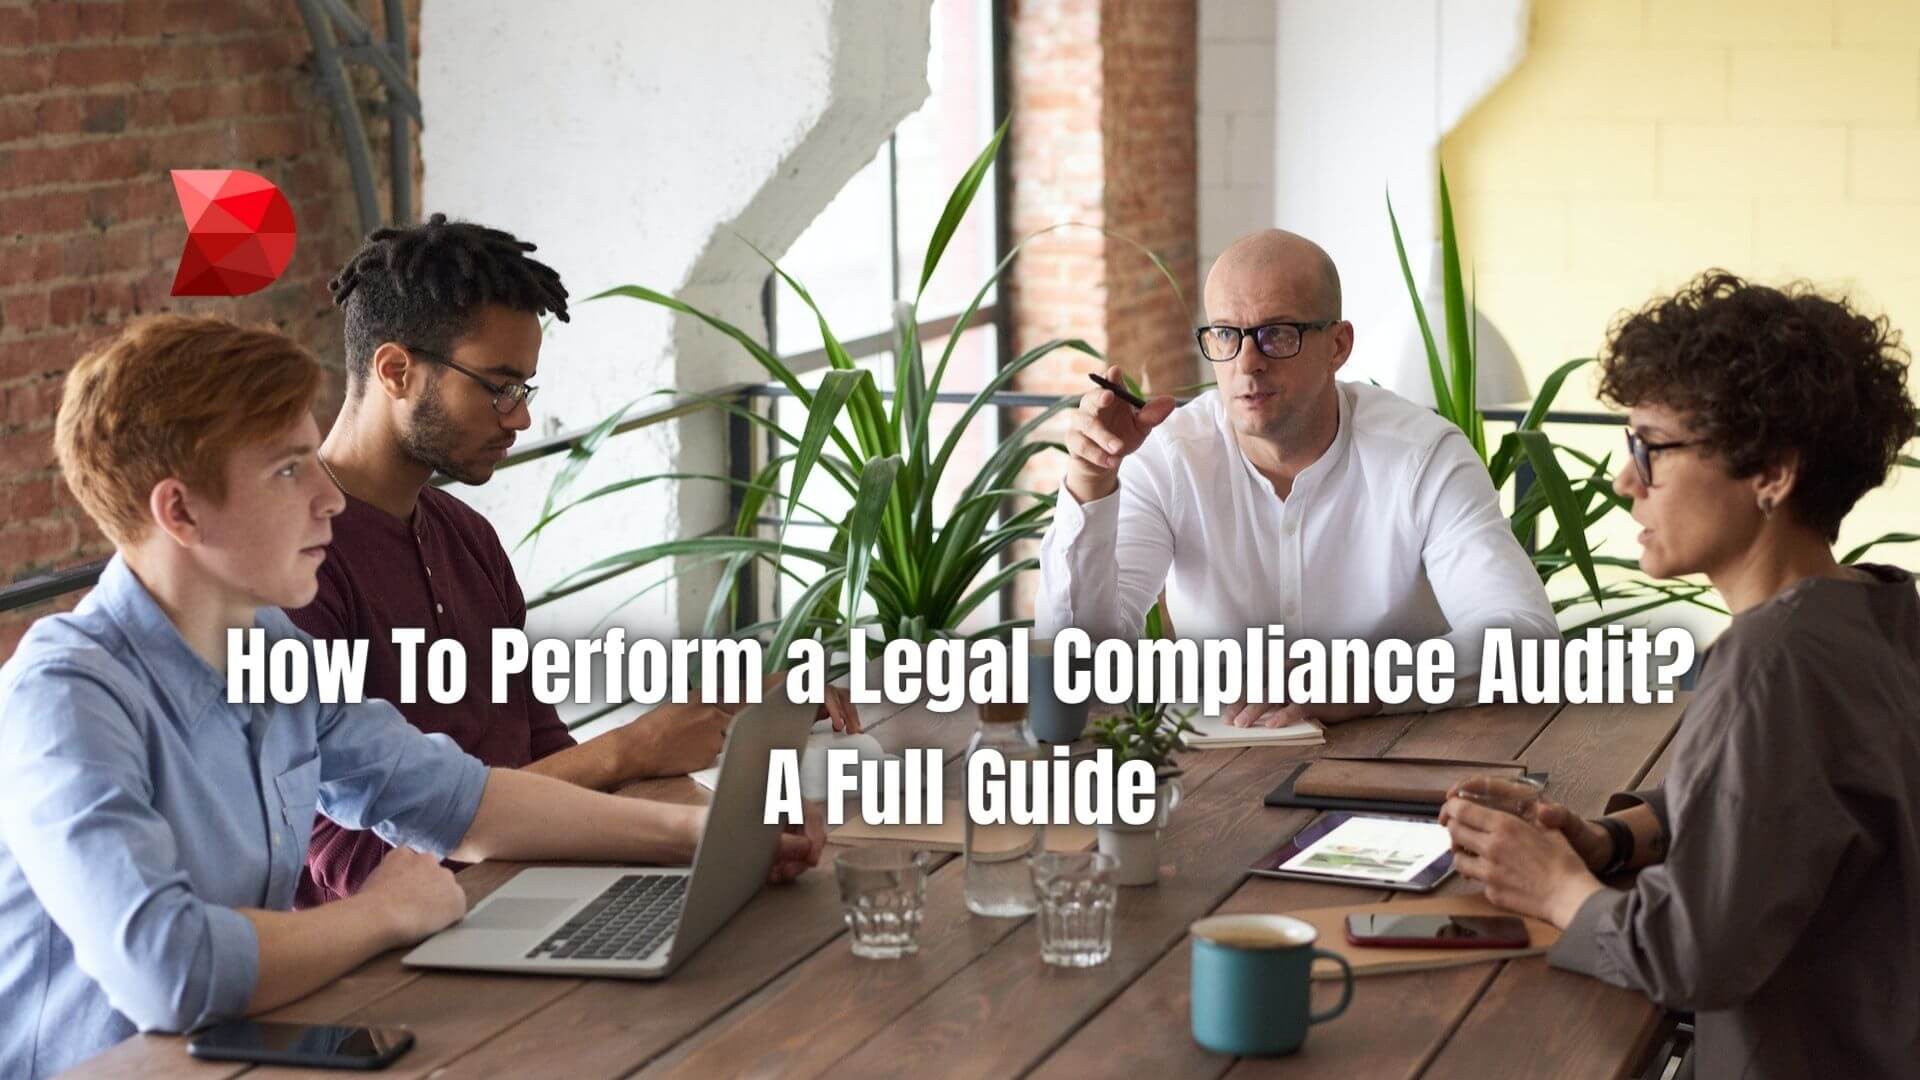 Conducting legal compliance audits is an essential part of running a successful business. Here's how to perform one for your business.